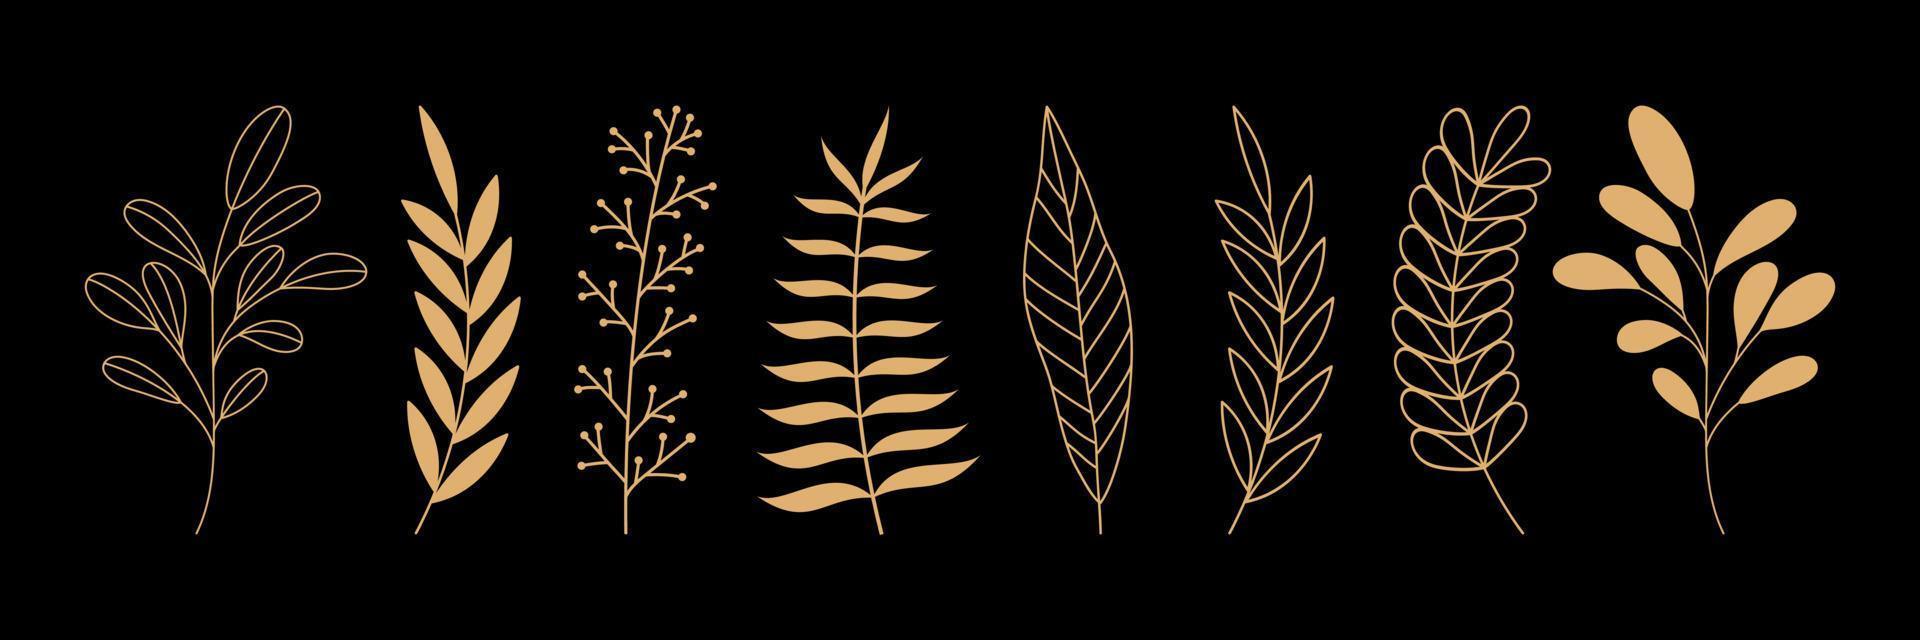 Hand drawn luxury golden leaves. Floral linear elements on black background. For print, poster, cover, banner, fabric, invitation. vector